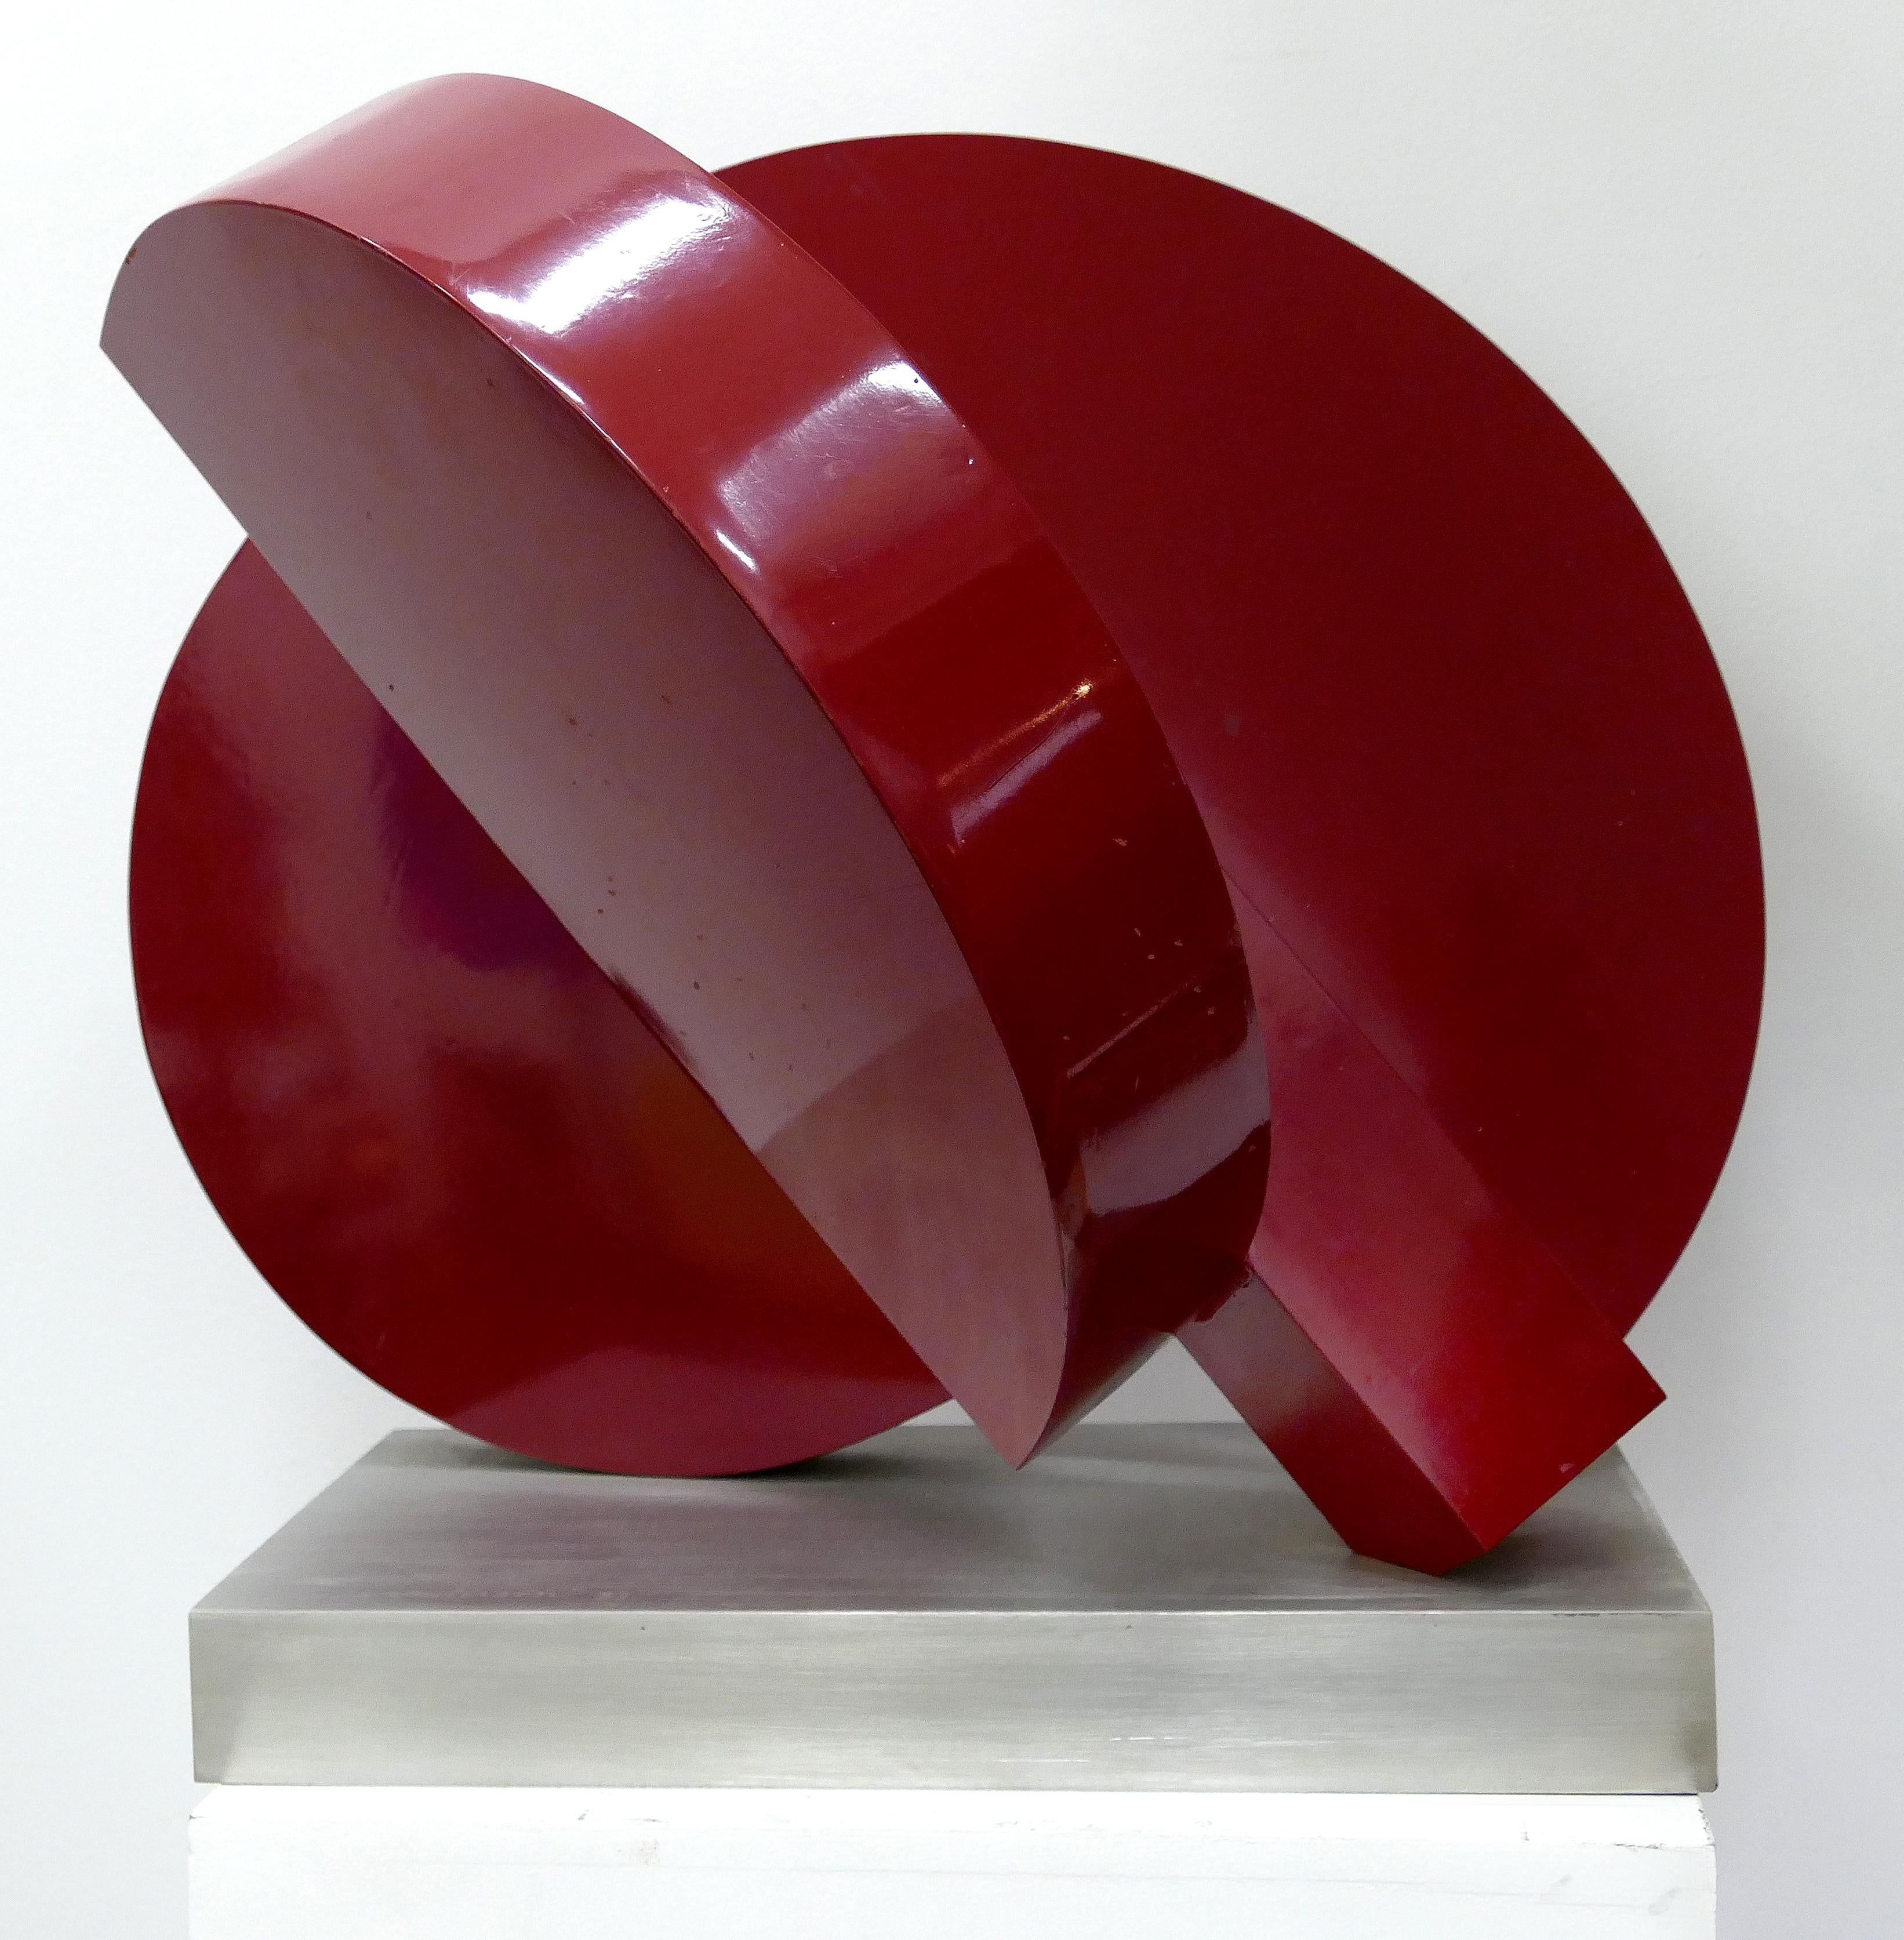 Painted Postmodern Abstract Steel Sculpture by M. Anderson, 1981